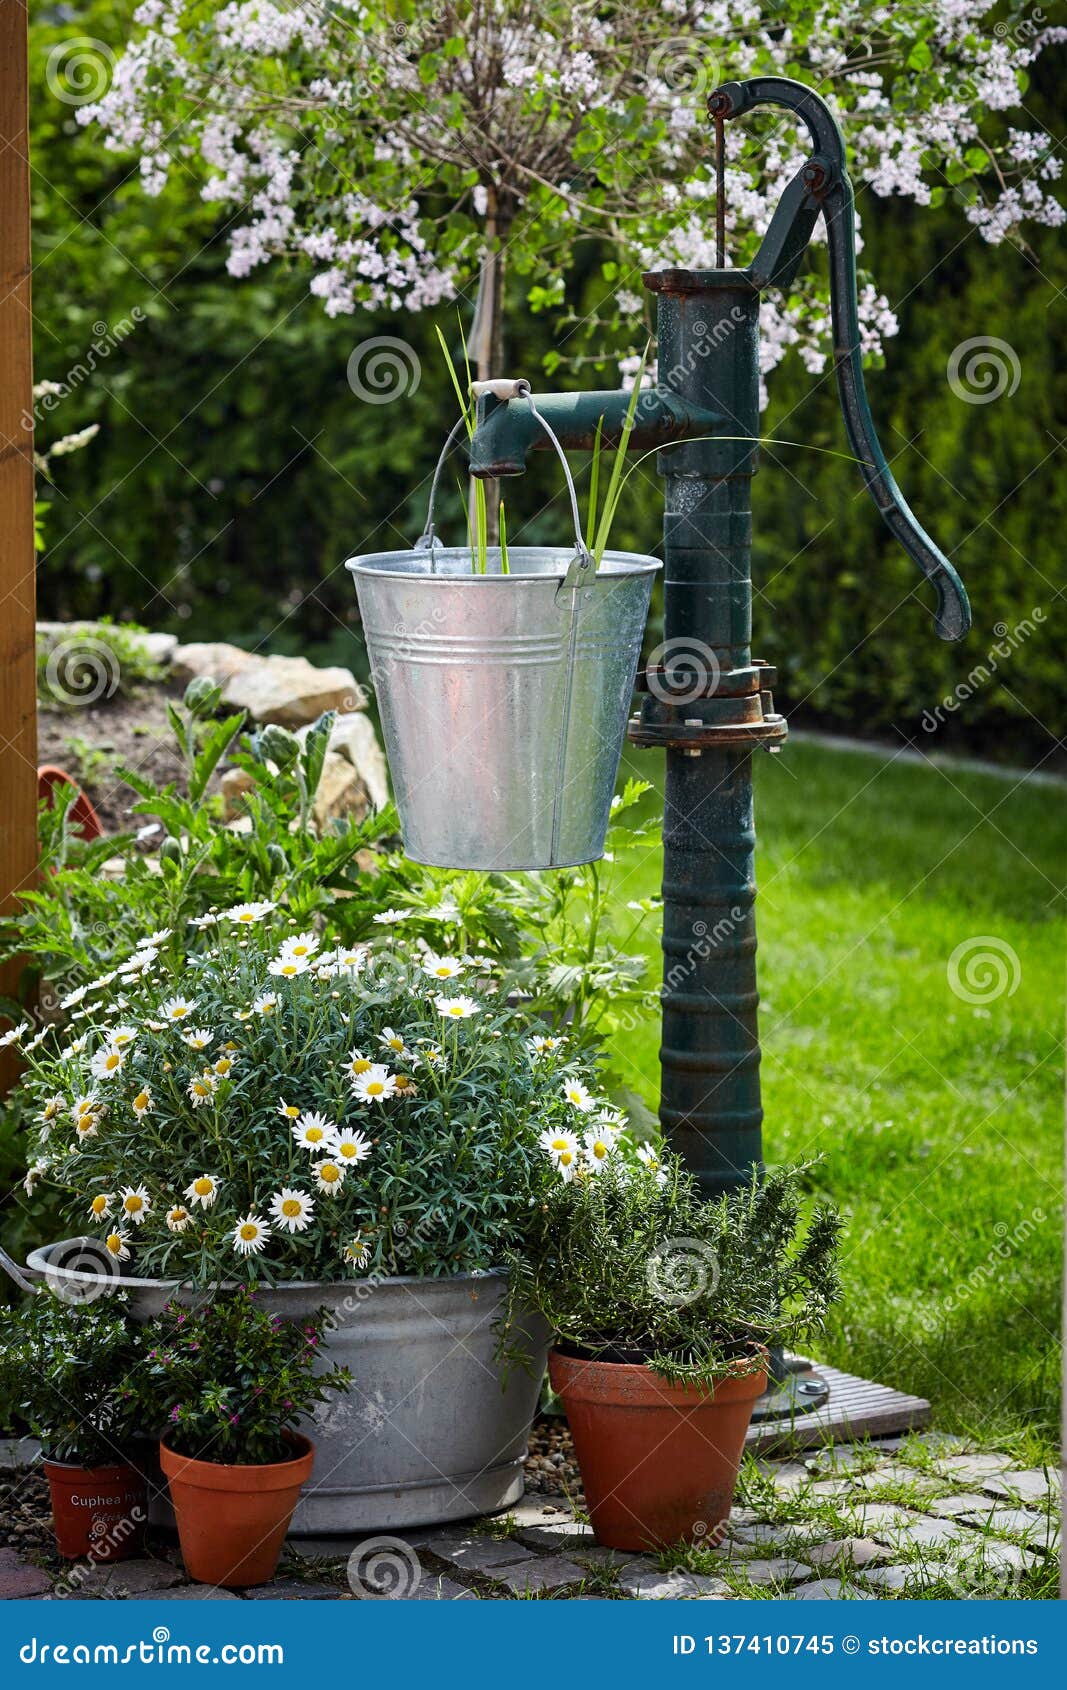 Old Cast Iron Pump and Metal Pail Stock Image - Image of